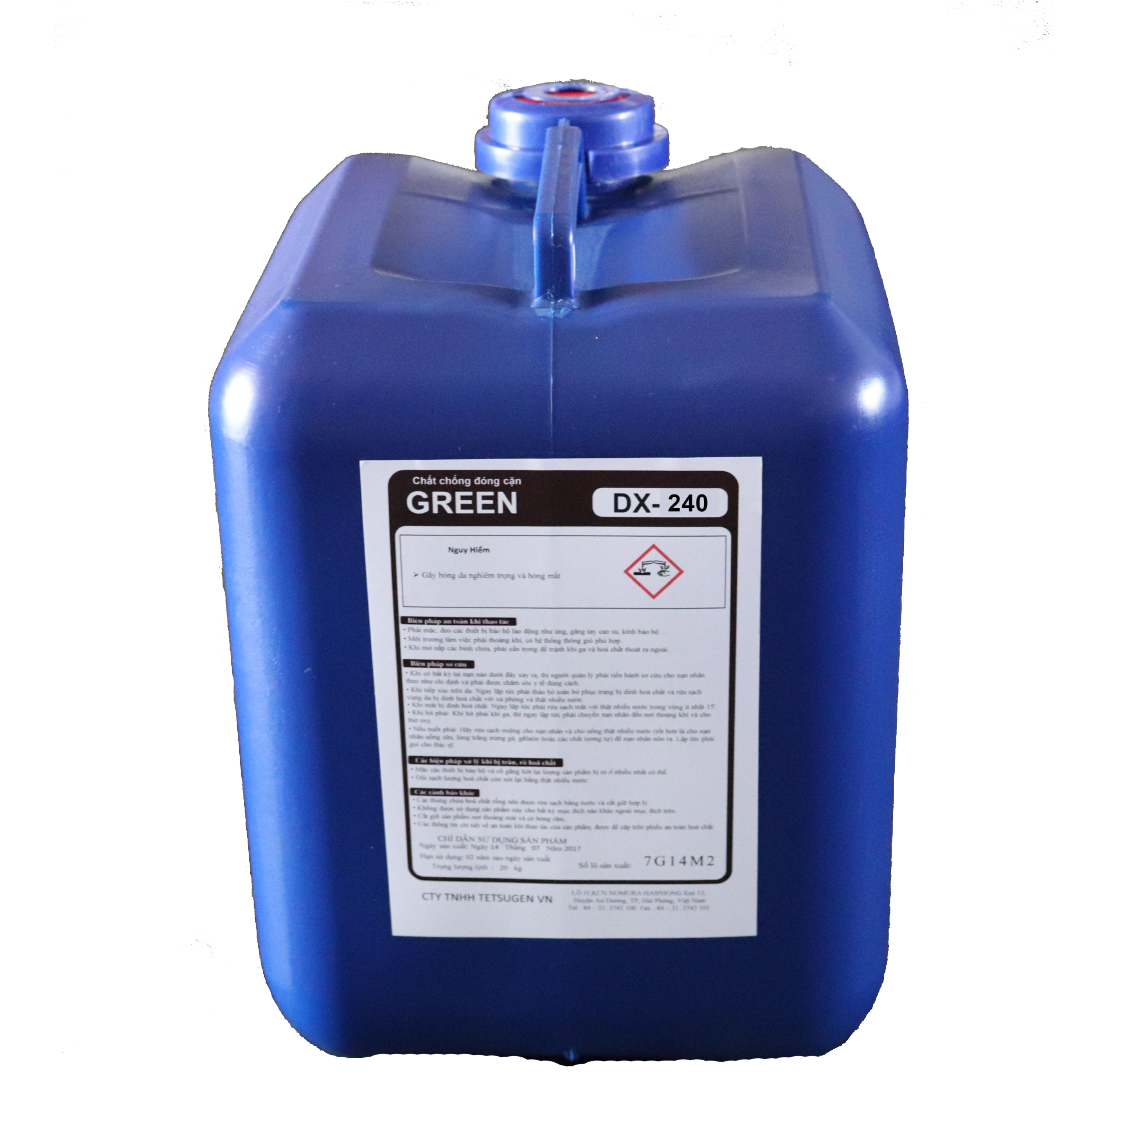 Anti scale and anti corrosion chemicals GREEN DX 240